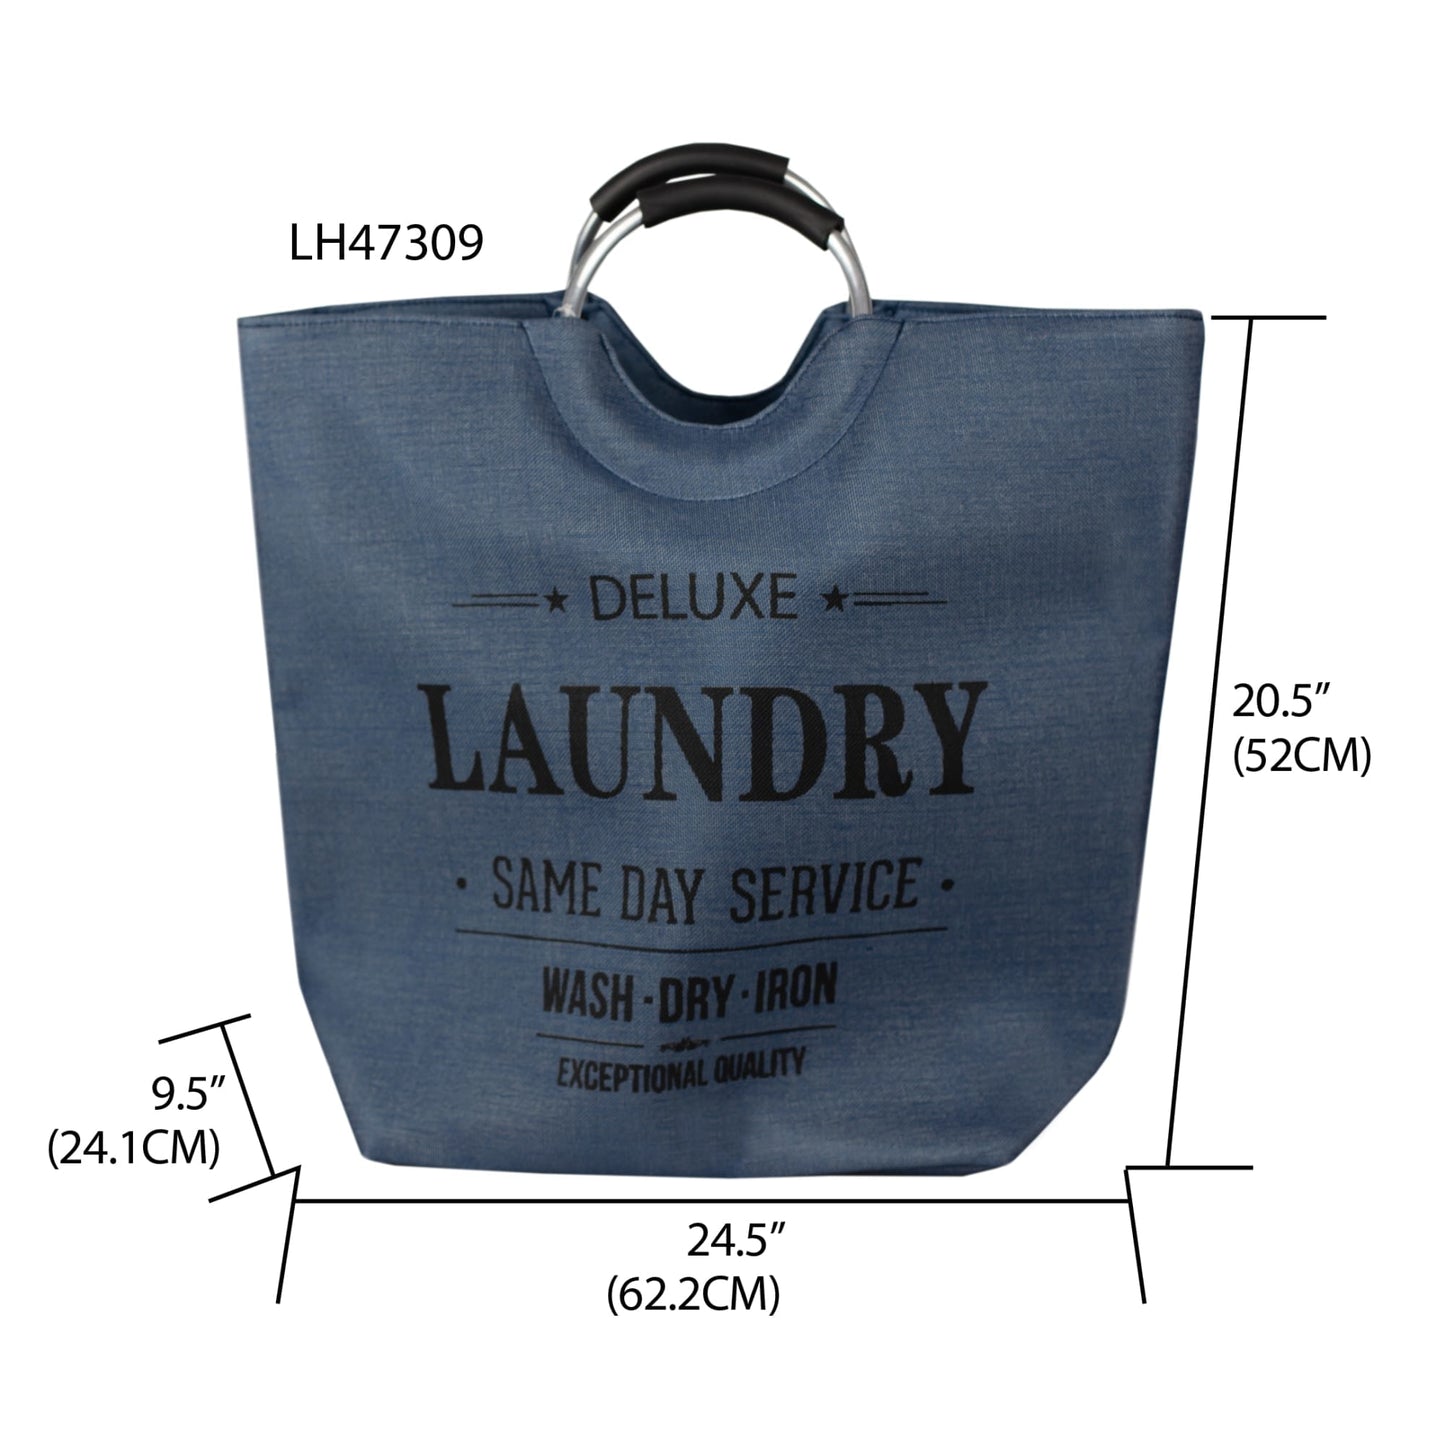 Deluxe Laundry Canvas Hamper Tote with Soft Grip Handles, Navy